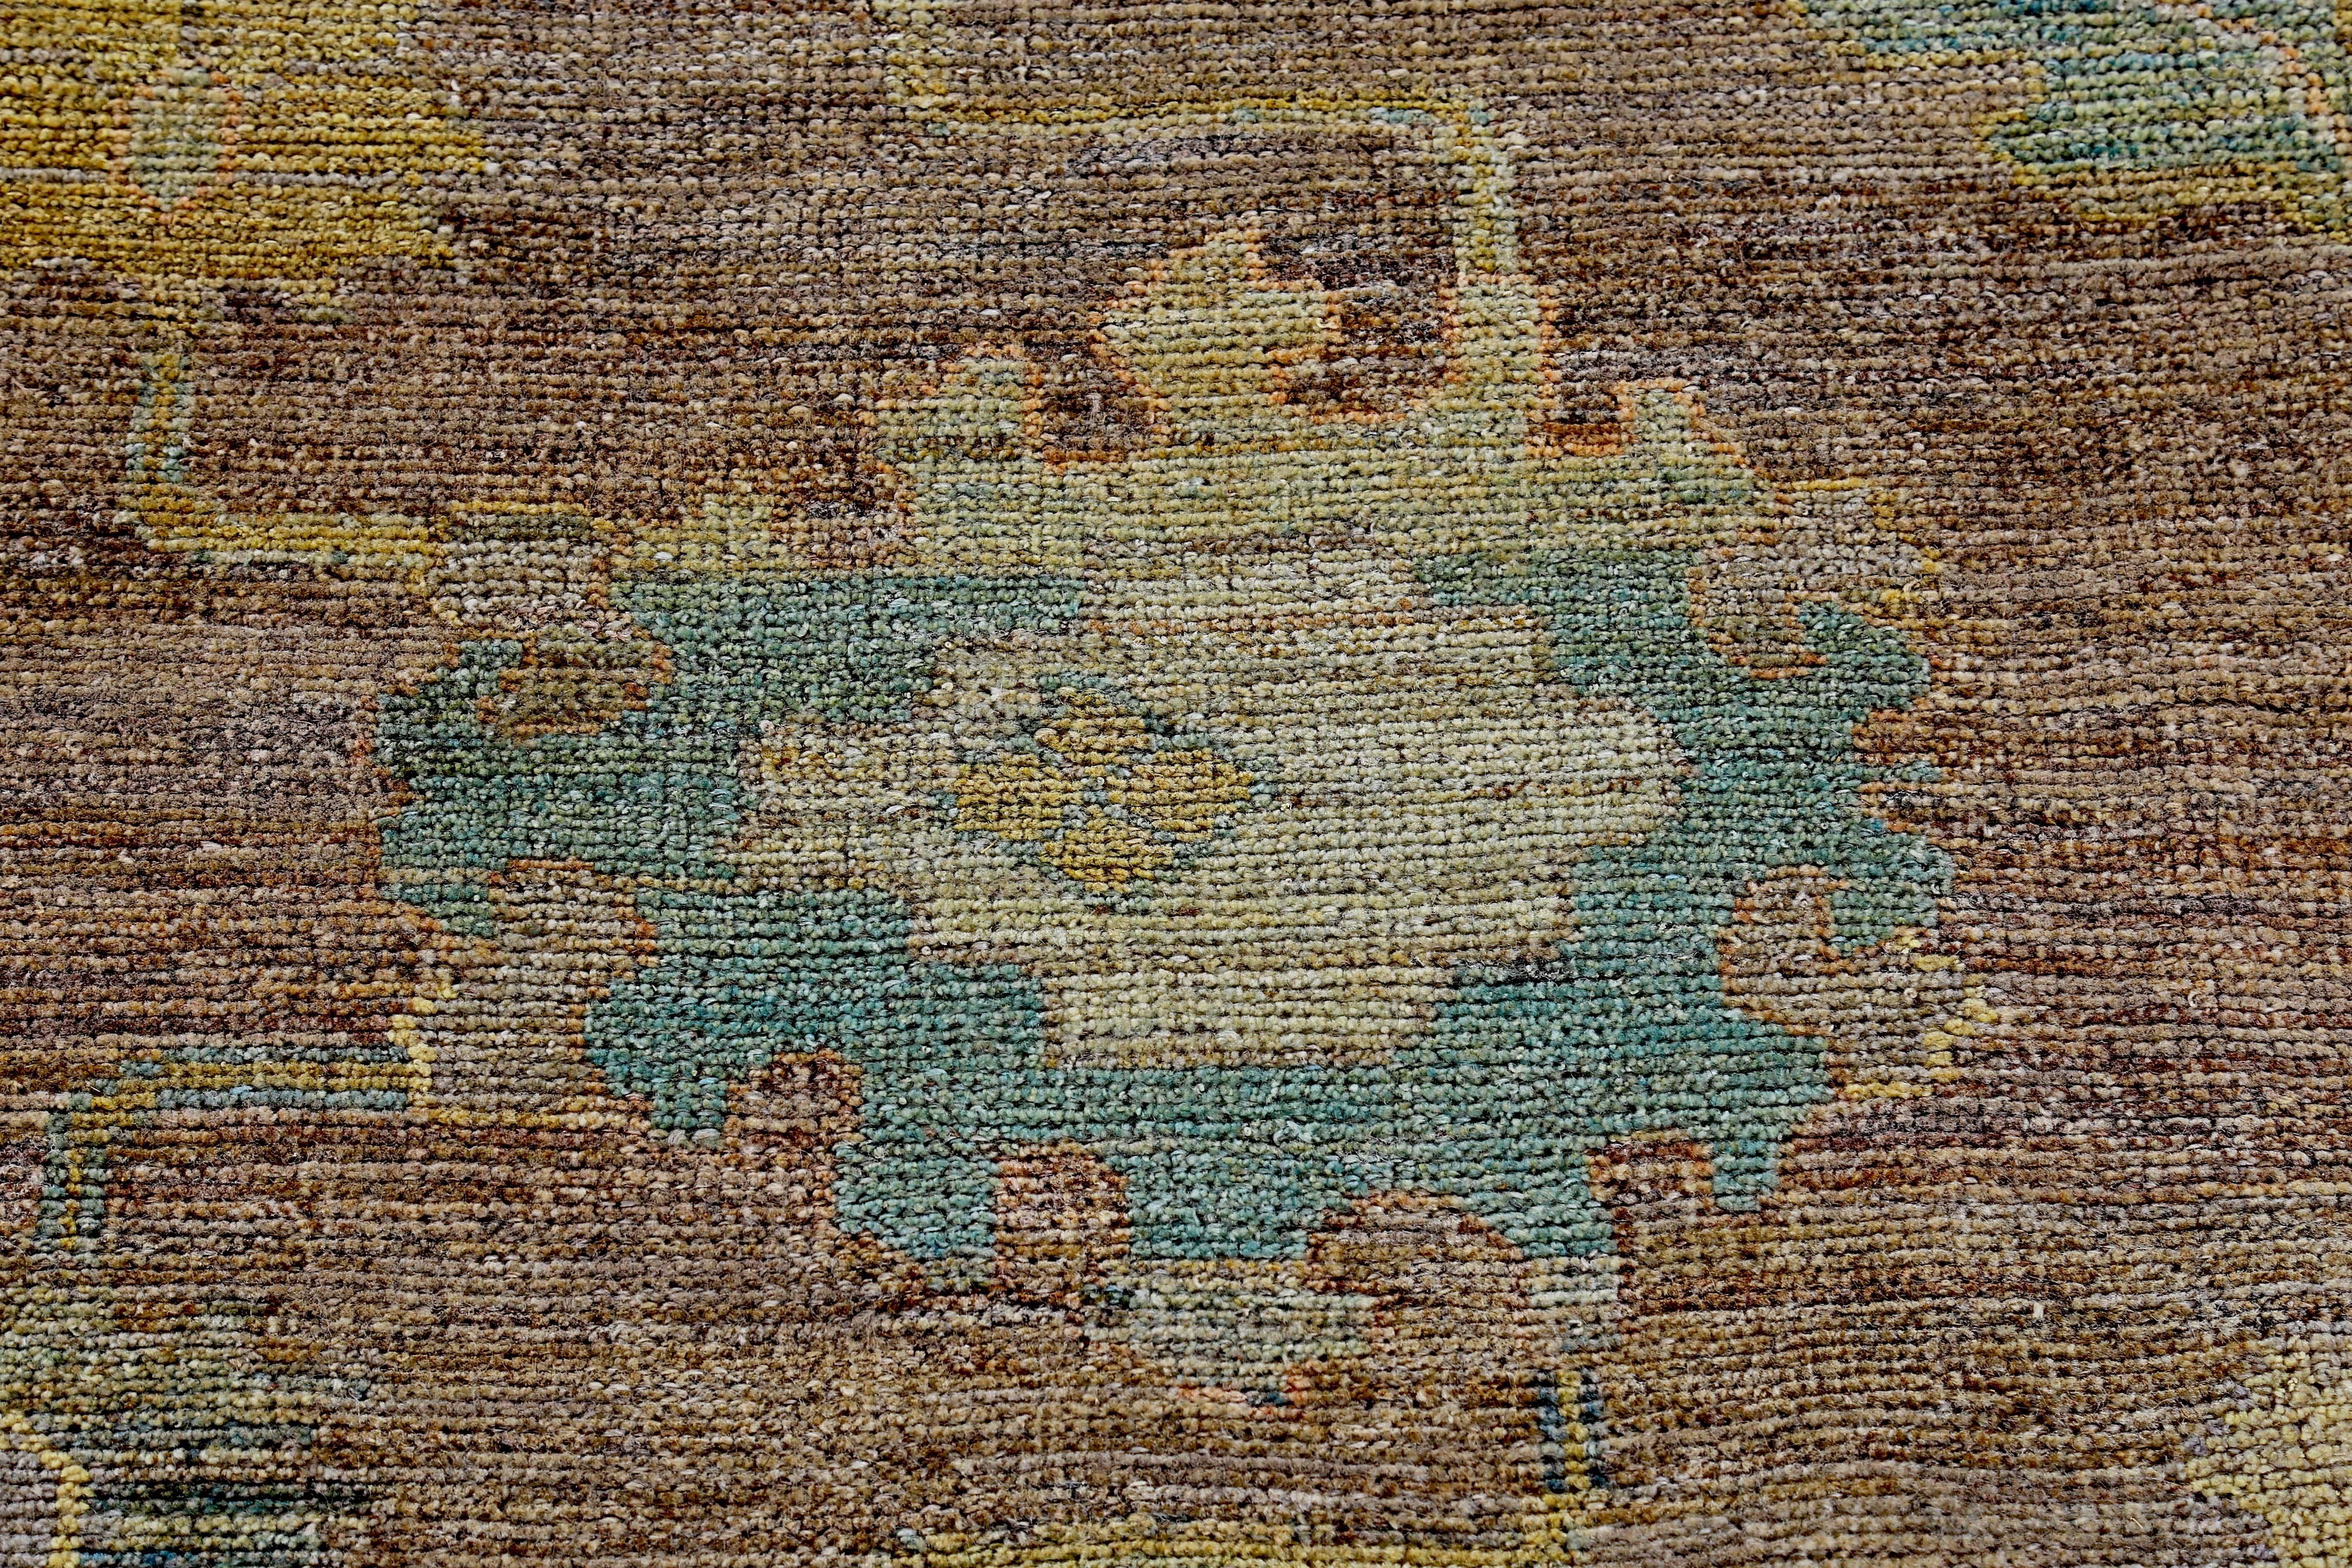 Hand-Woven Turkish Oushak Rug with Yellow, Green and Blue Flower Heads on Brown Field For Sale